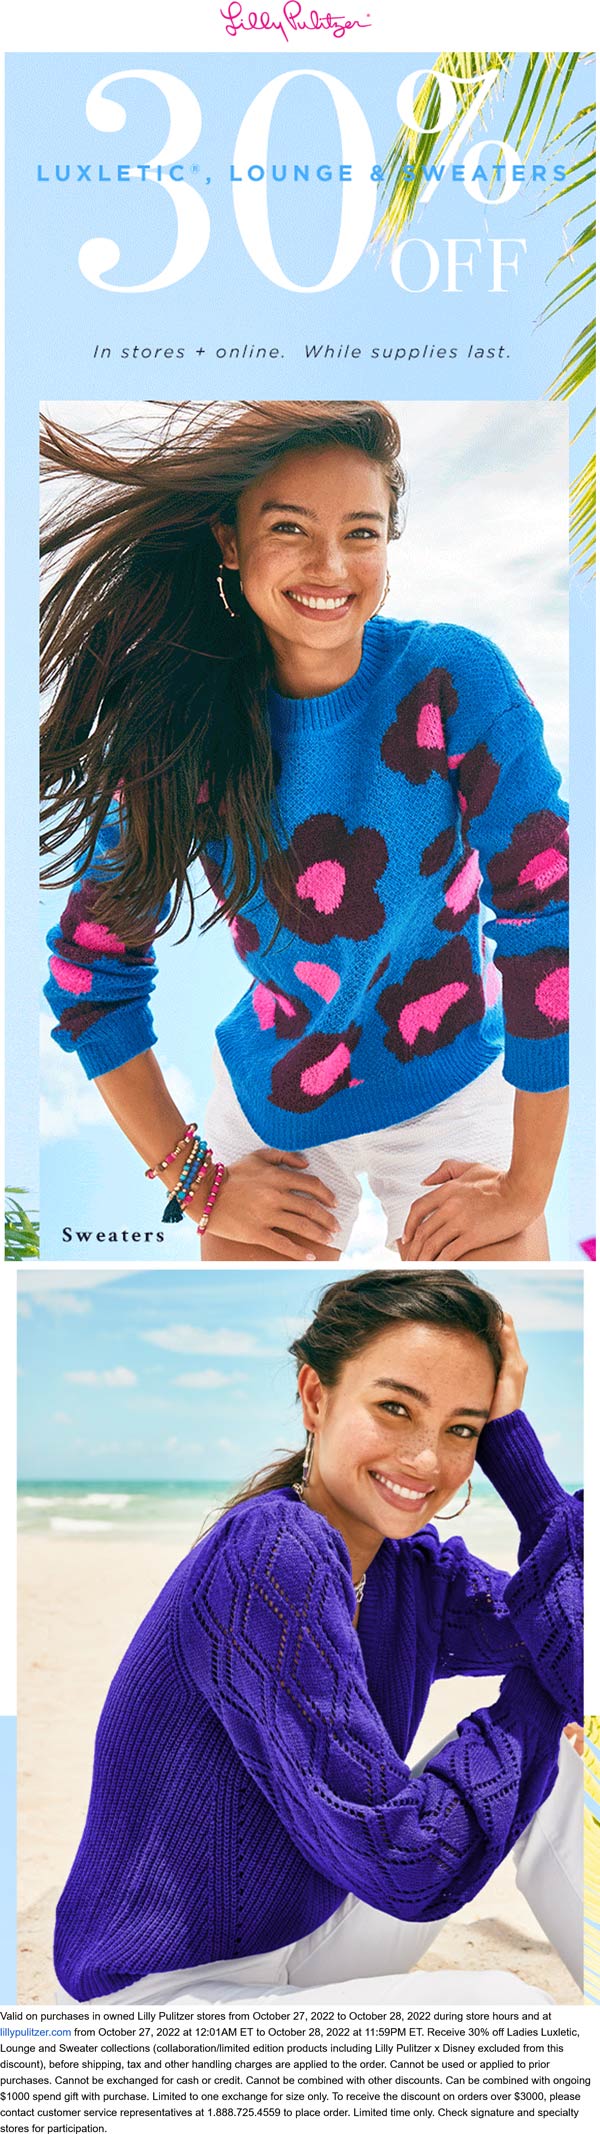 Lilly Pulitzer stores Coupon  30% off Luxletic, lounge & sweaters at Lilly Pulitzer, ditto online #lillypulitzer 